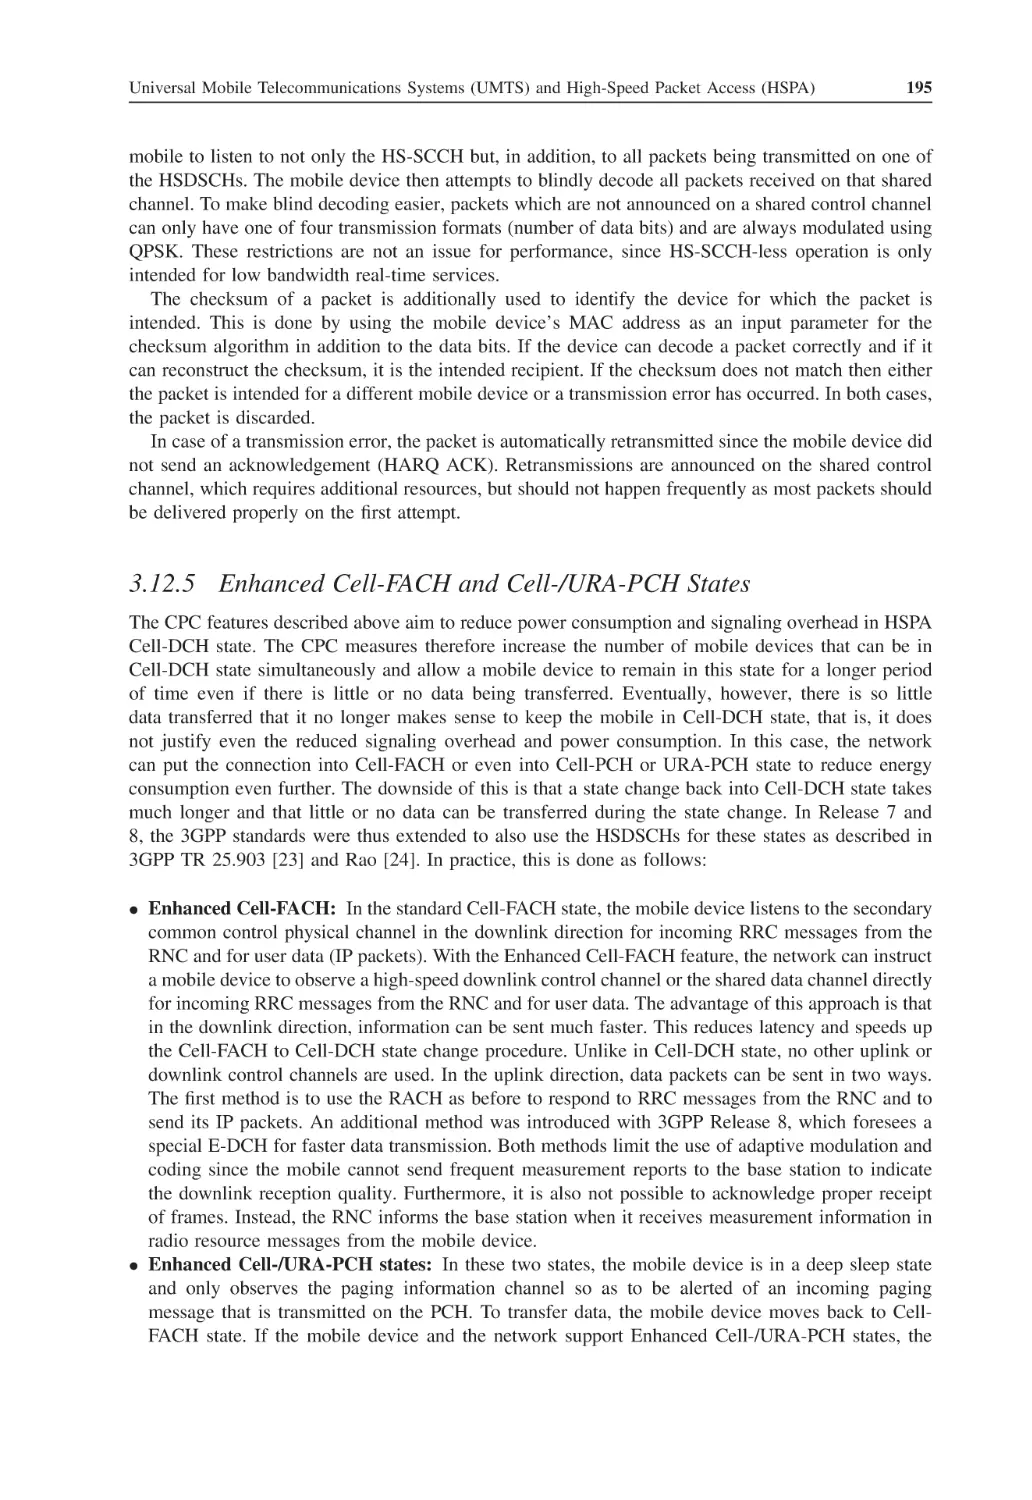 3.12.5 Enhanced Cell-FACH and Cell-/URA-PCH States